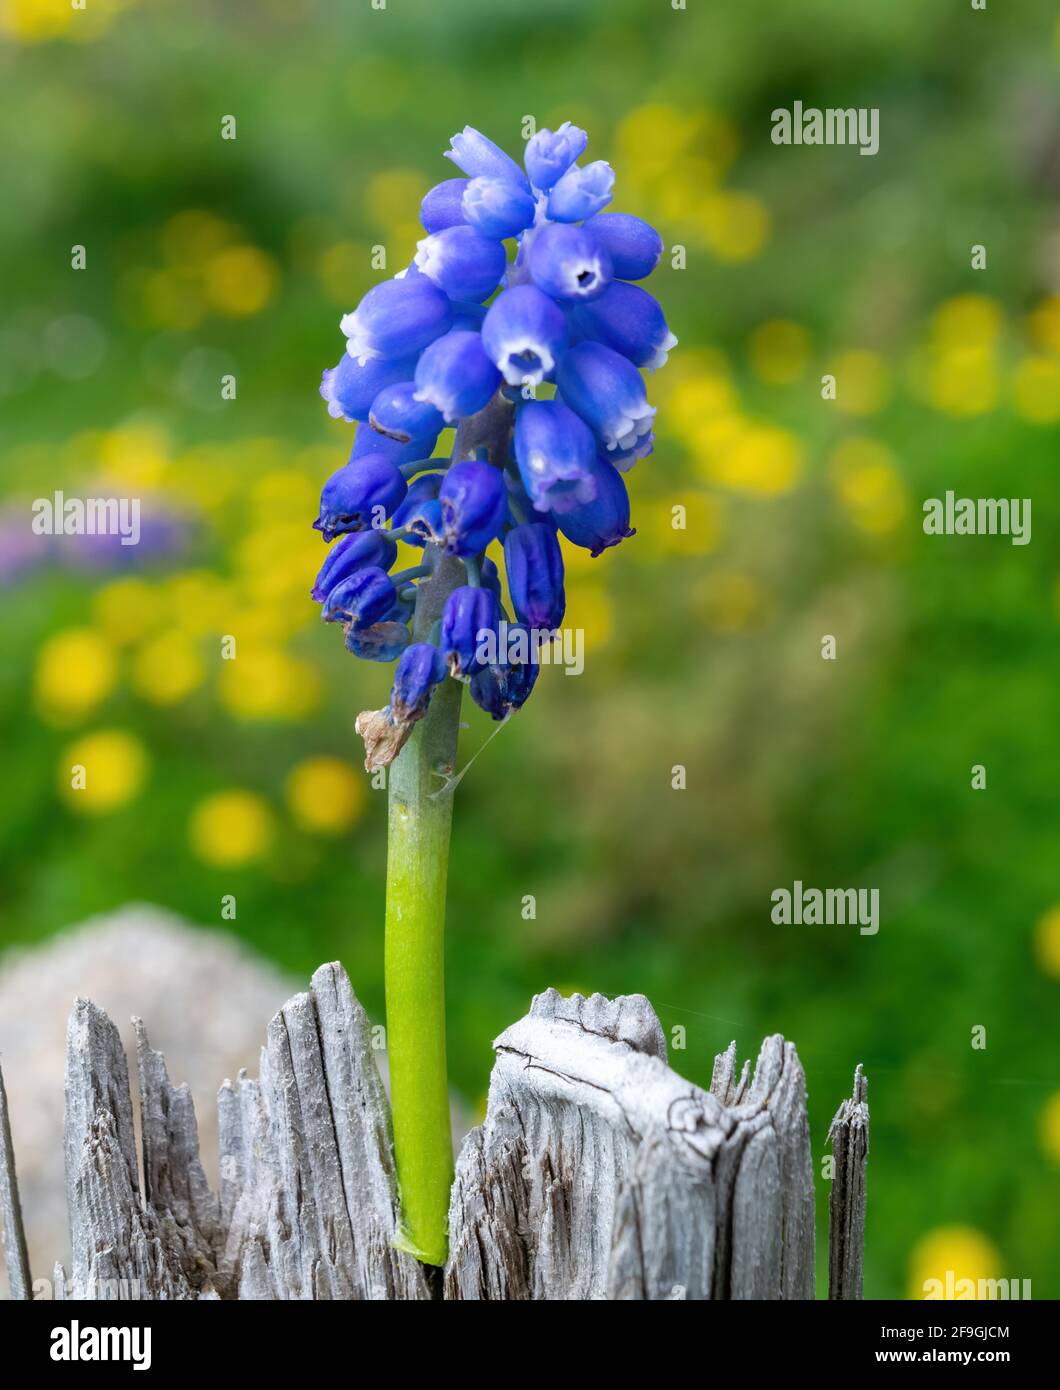 A blooming grape hyacinth in the garden in the blurred natural background Stock Photo